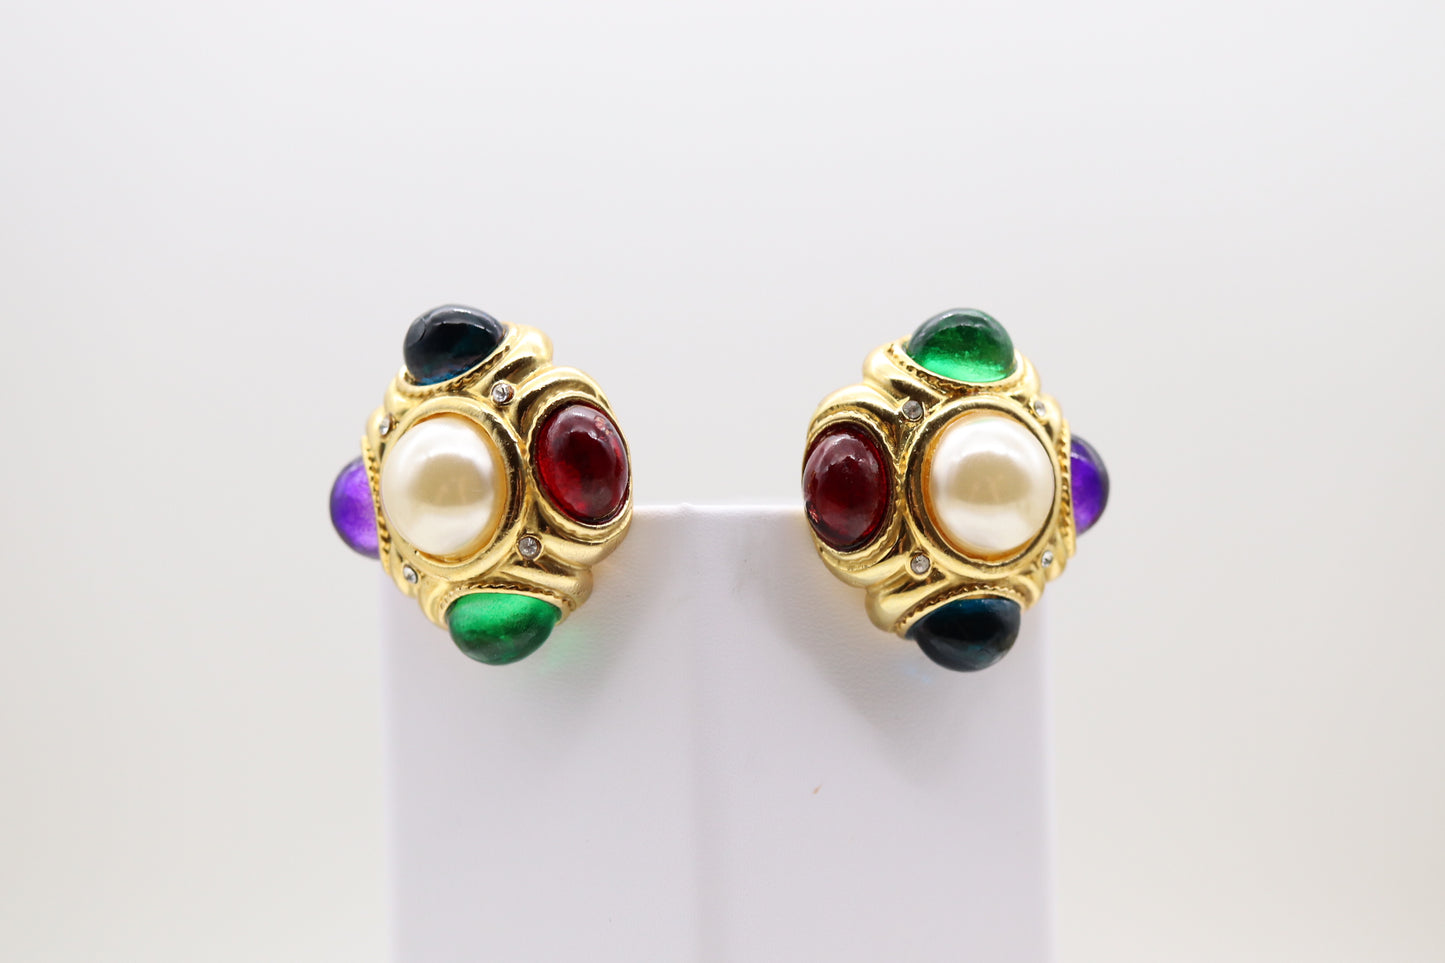 Matte Gold Square Clip-On Earrings with Multi-Colored Stones